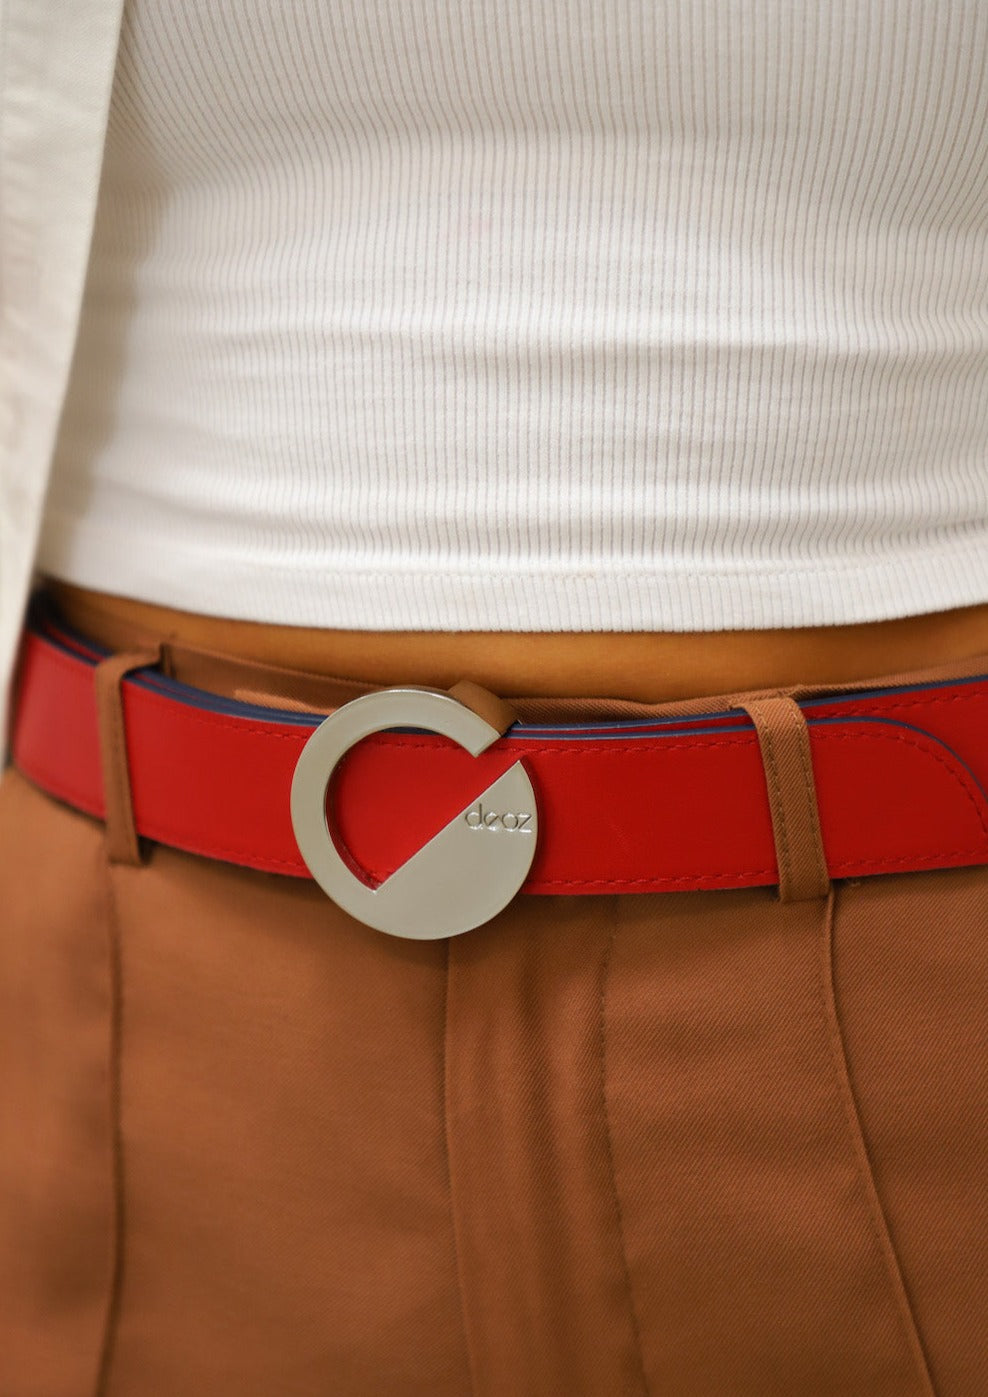 Dooz red genuine italian leather reversible belt handmade in usa with silver hardware